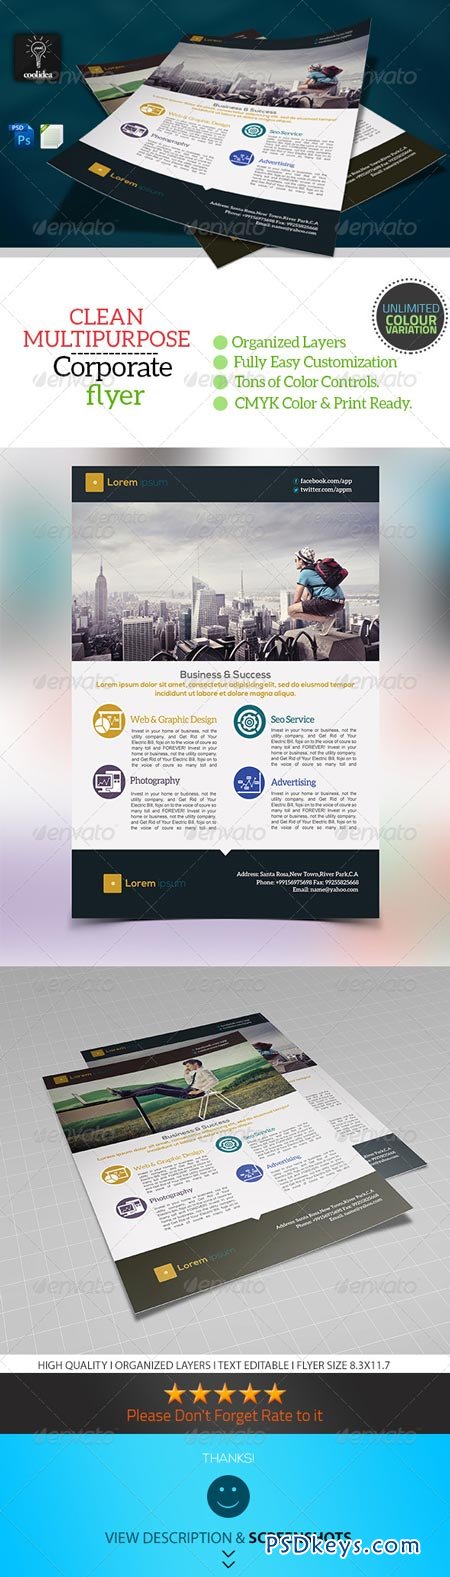 Corporate Flyer Template Business Vol03 6901618